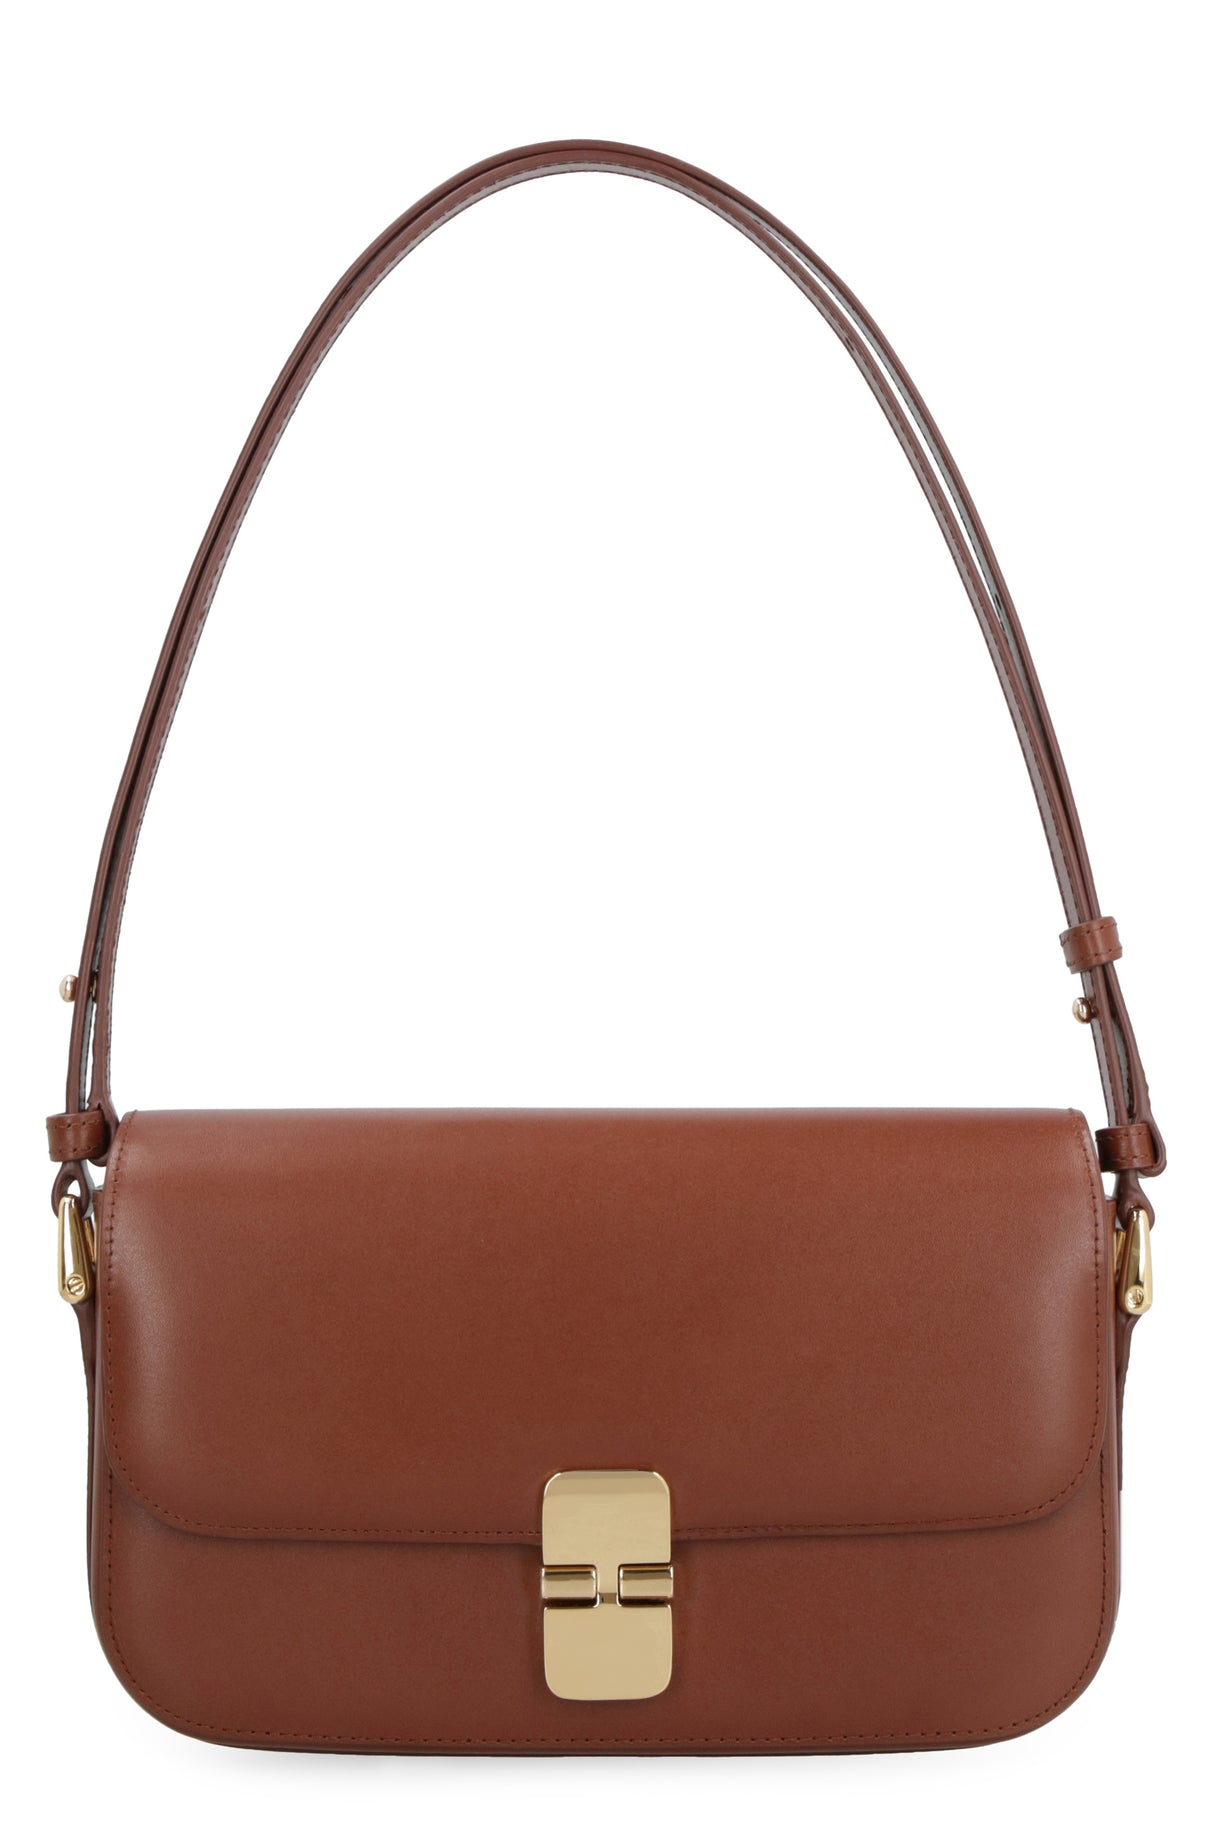 A.P.C. Women's Brown Smooth Leather Baguette Handbag for FW23